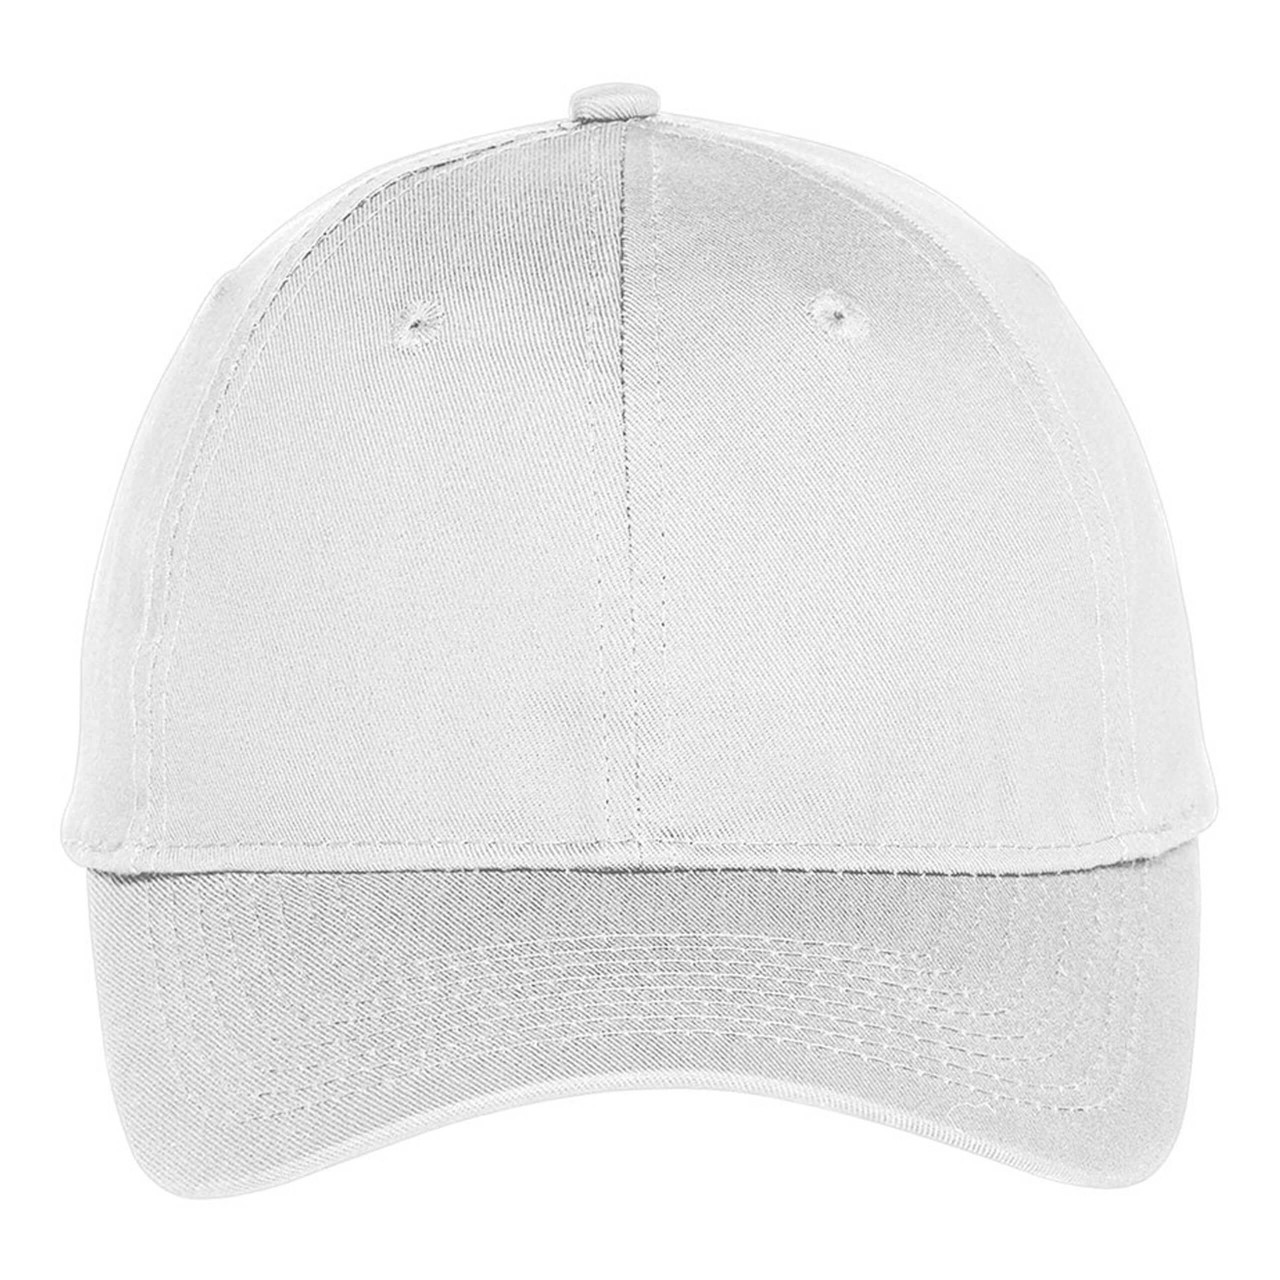 White Unstructured Twill Baseball Cap Blank, Adult One Size Fits All